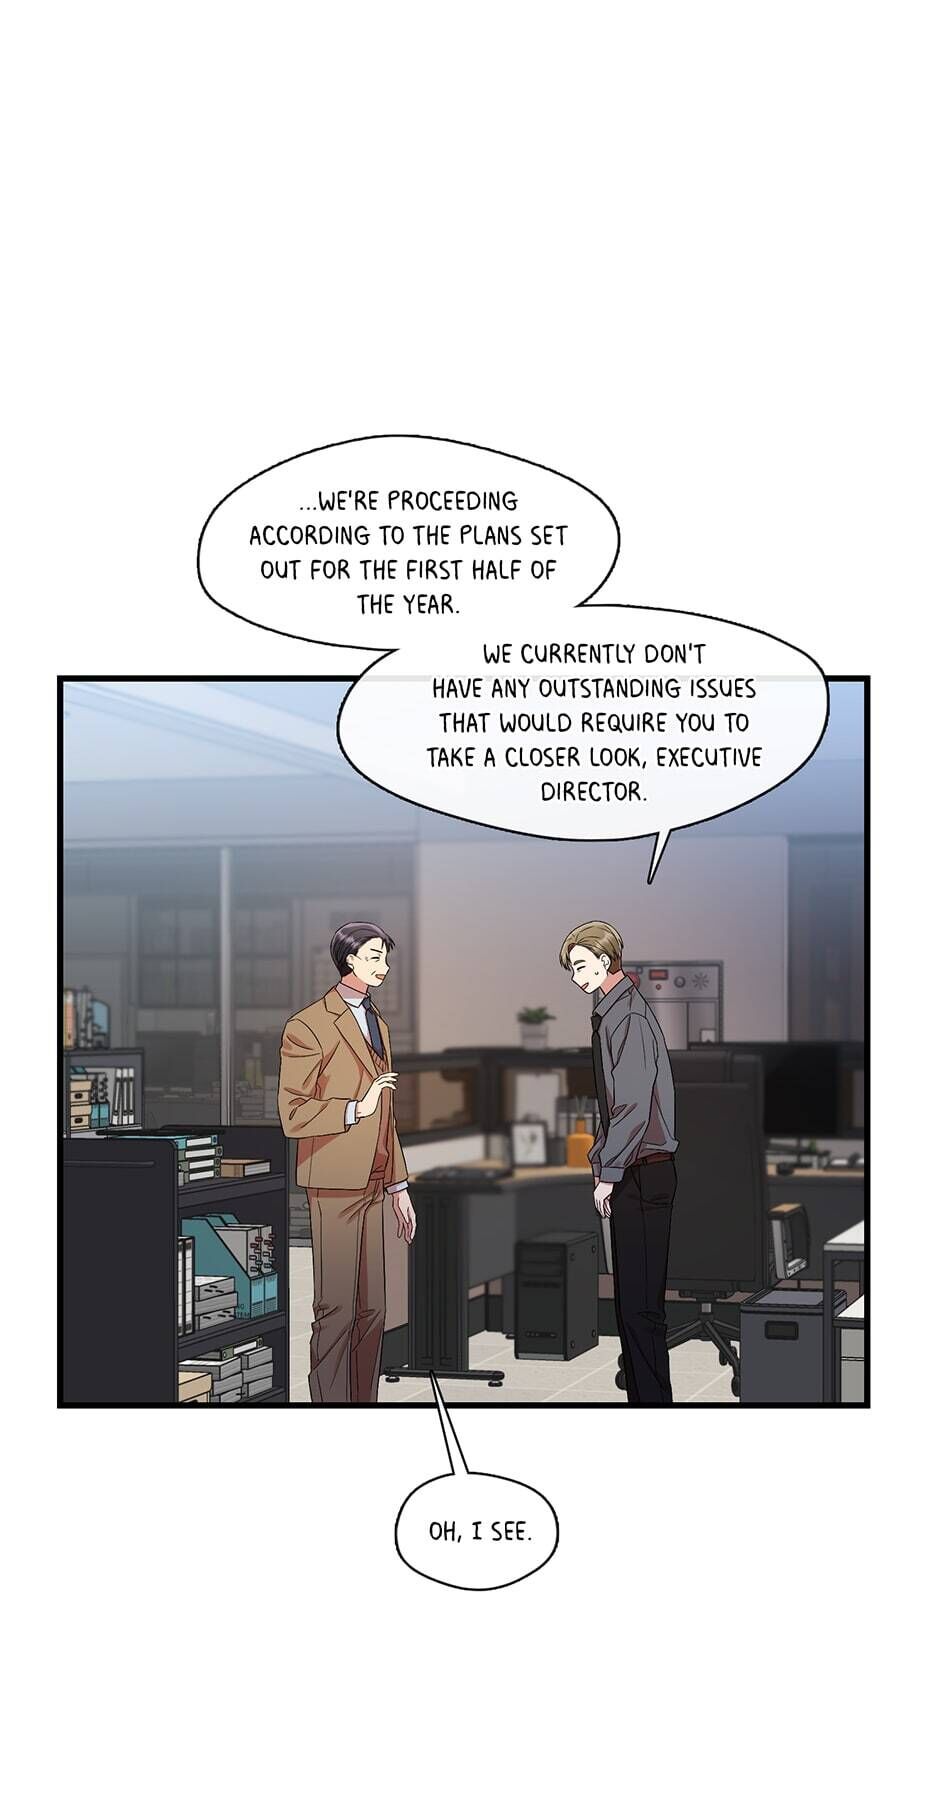 Office Romance Confidential chapter 24